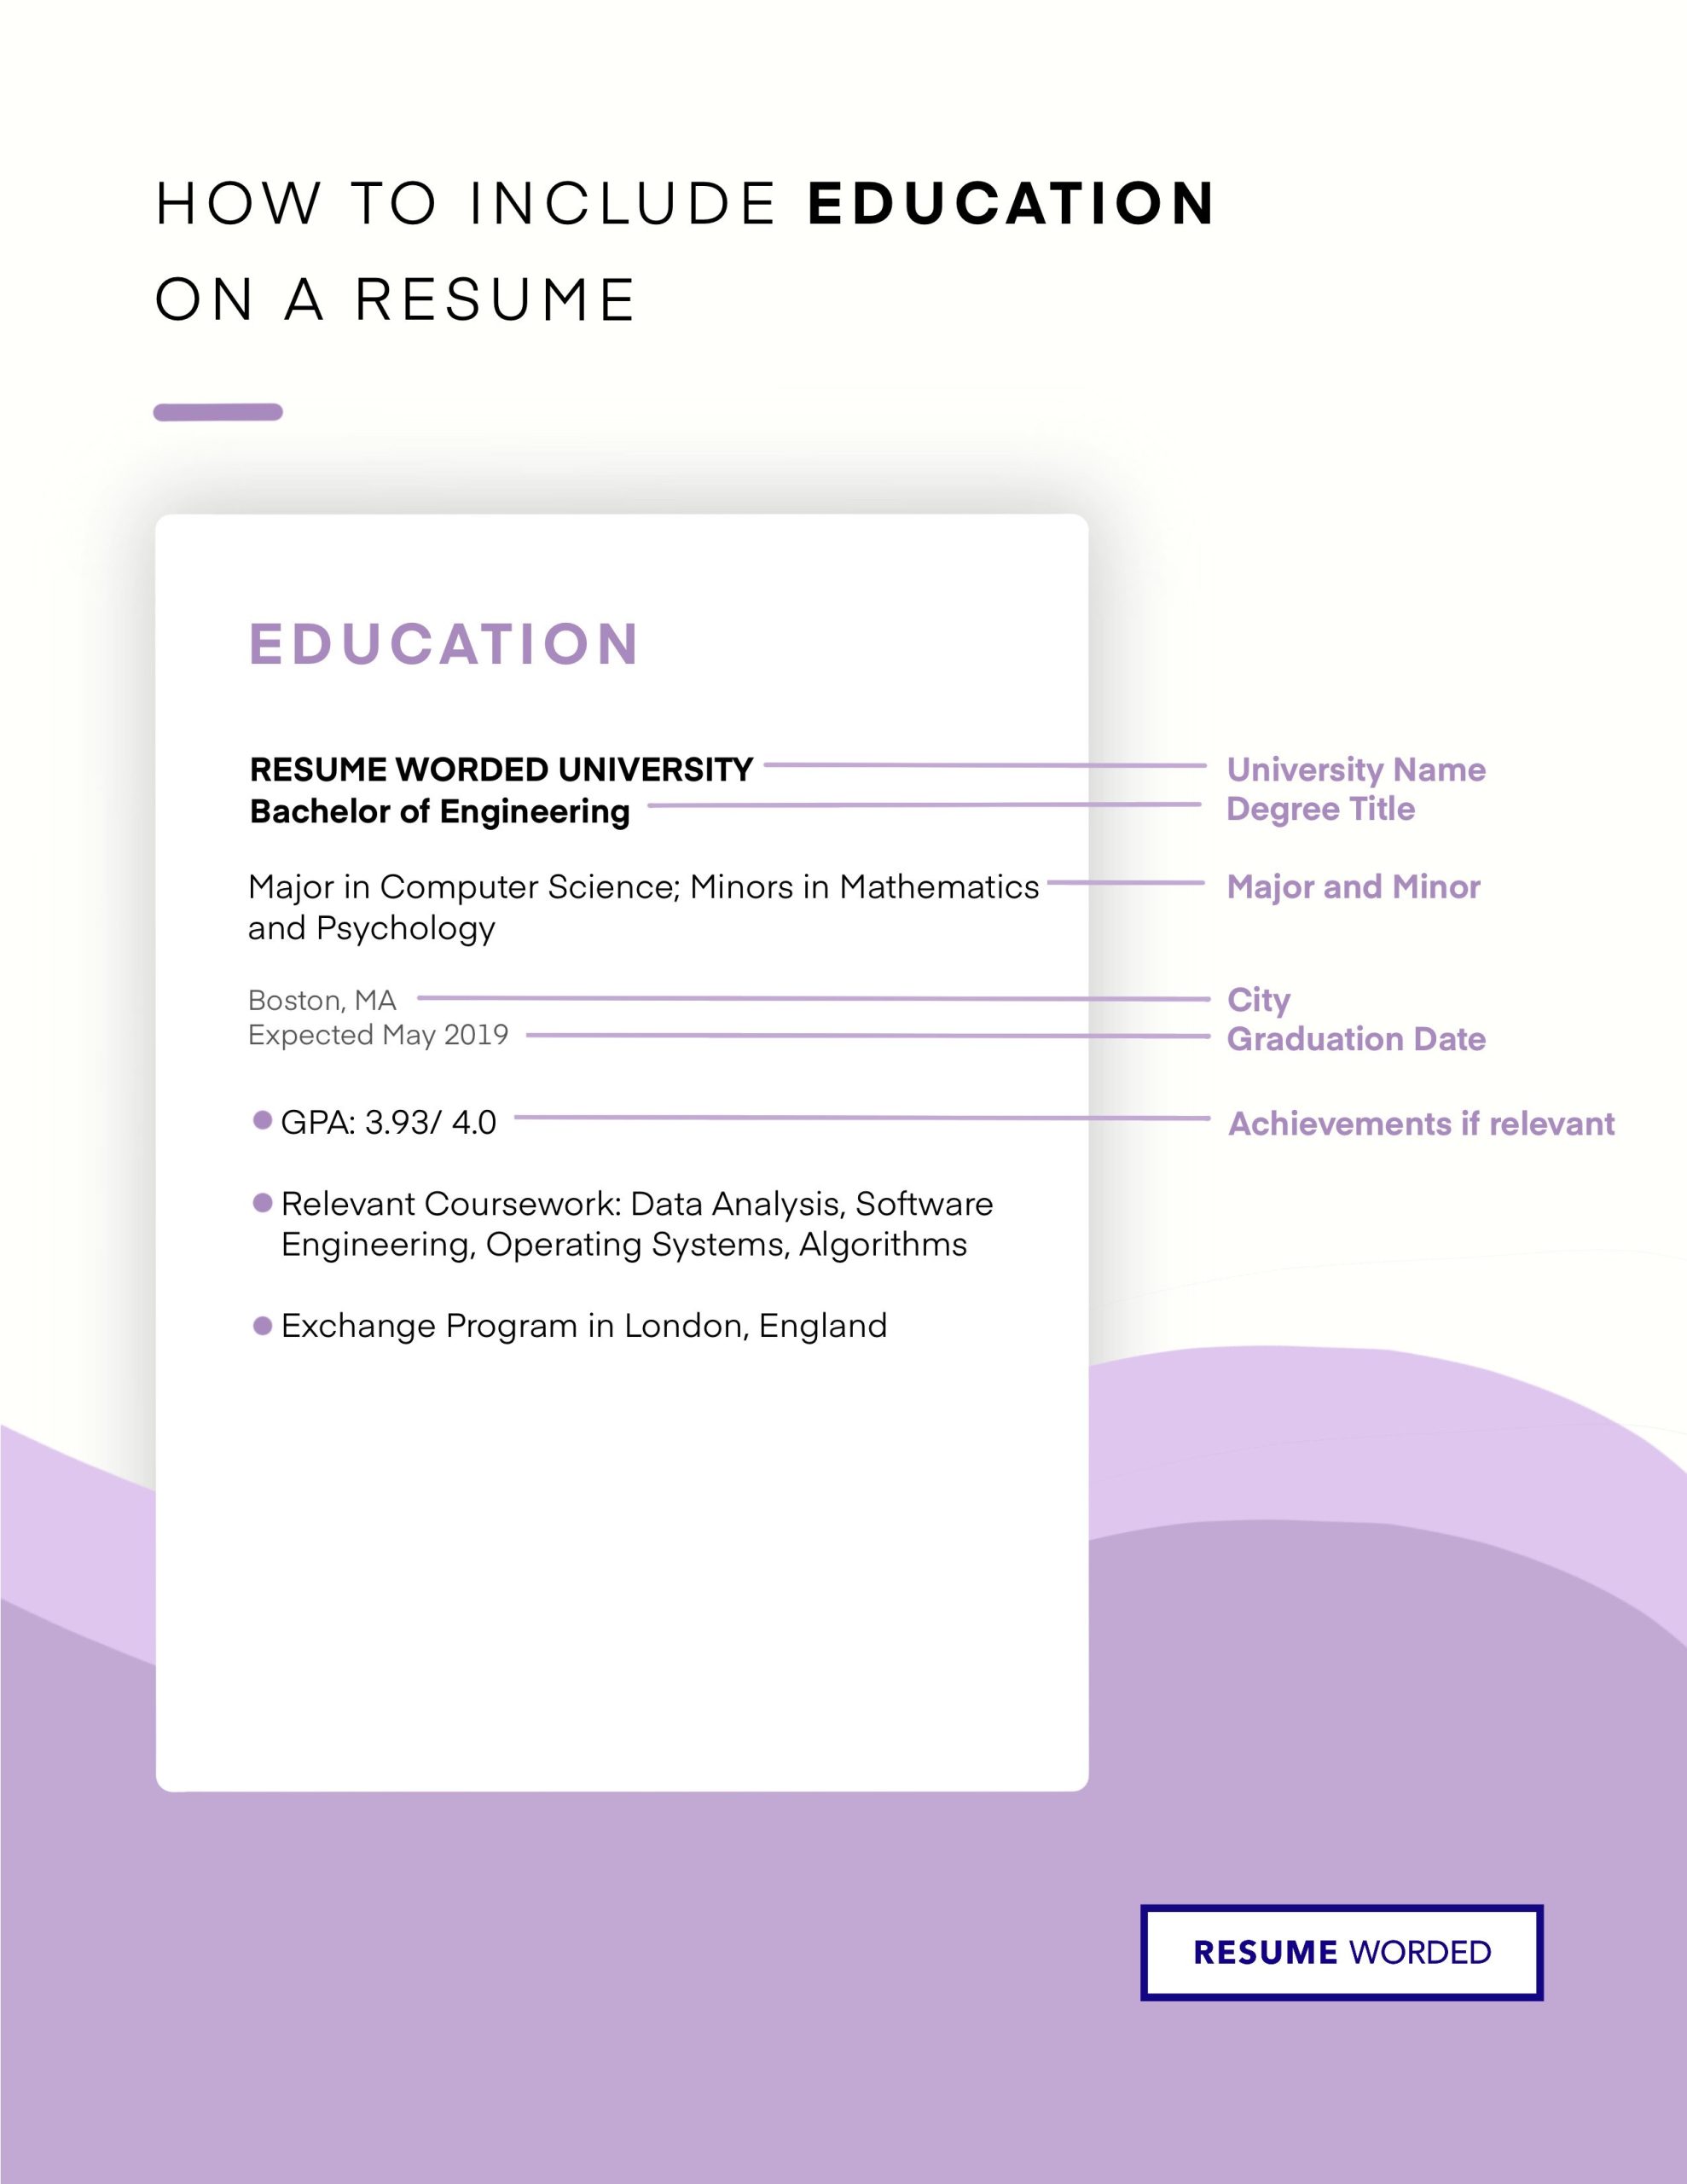 Sample Resume Expected Graduation Date format the Must-haves when Writing Your Education On Your Resume [for 2022]